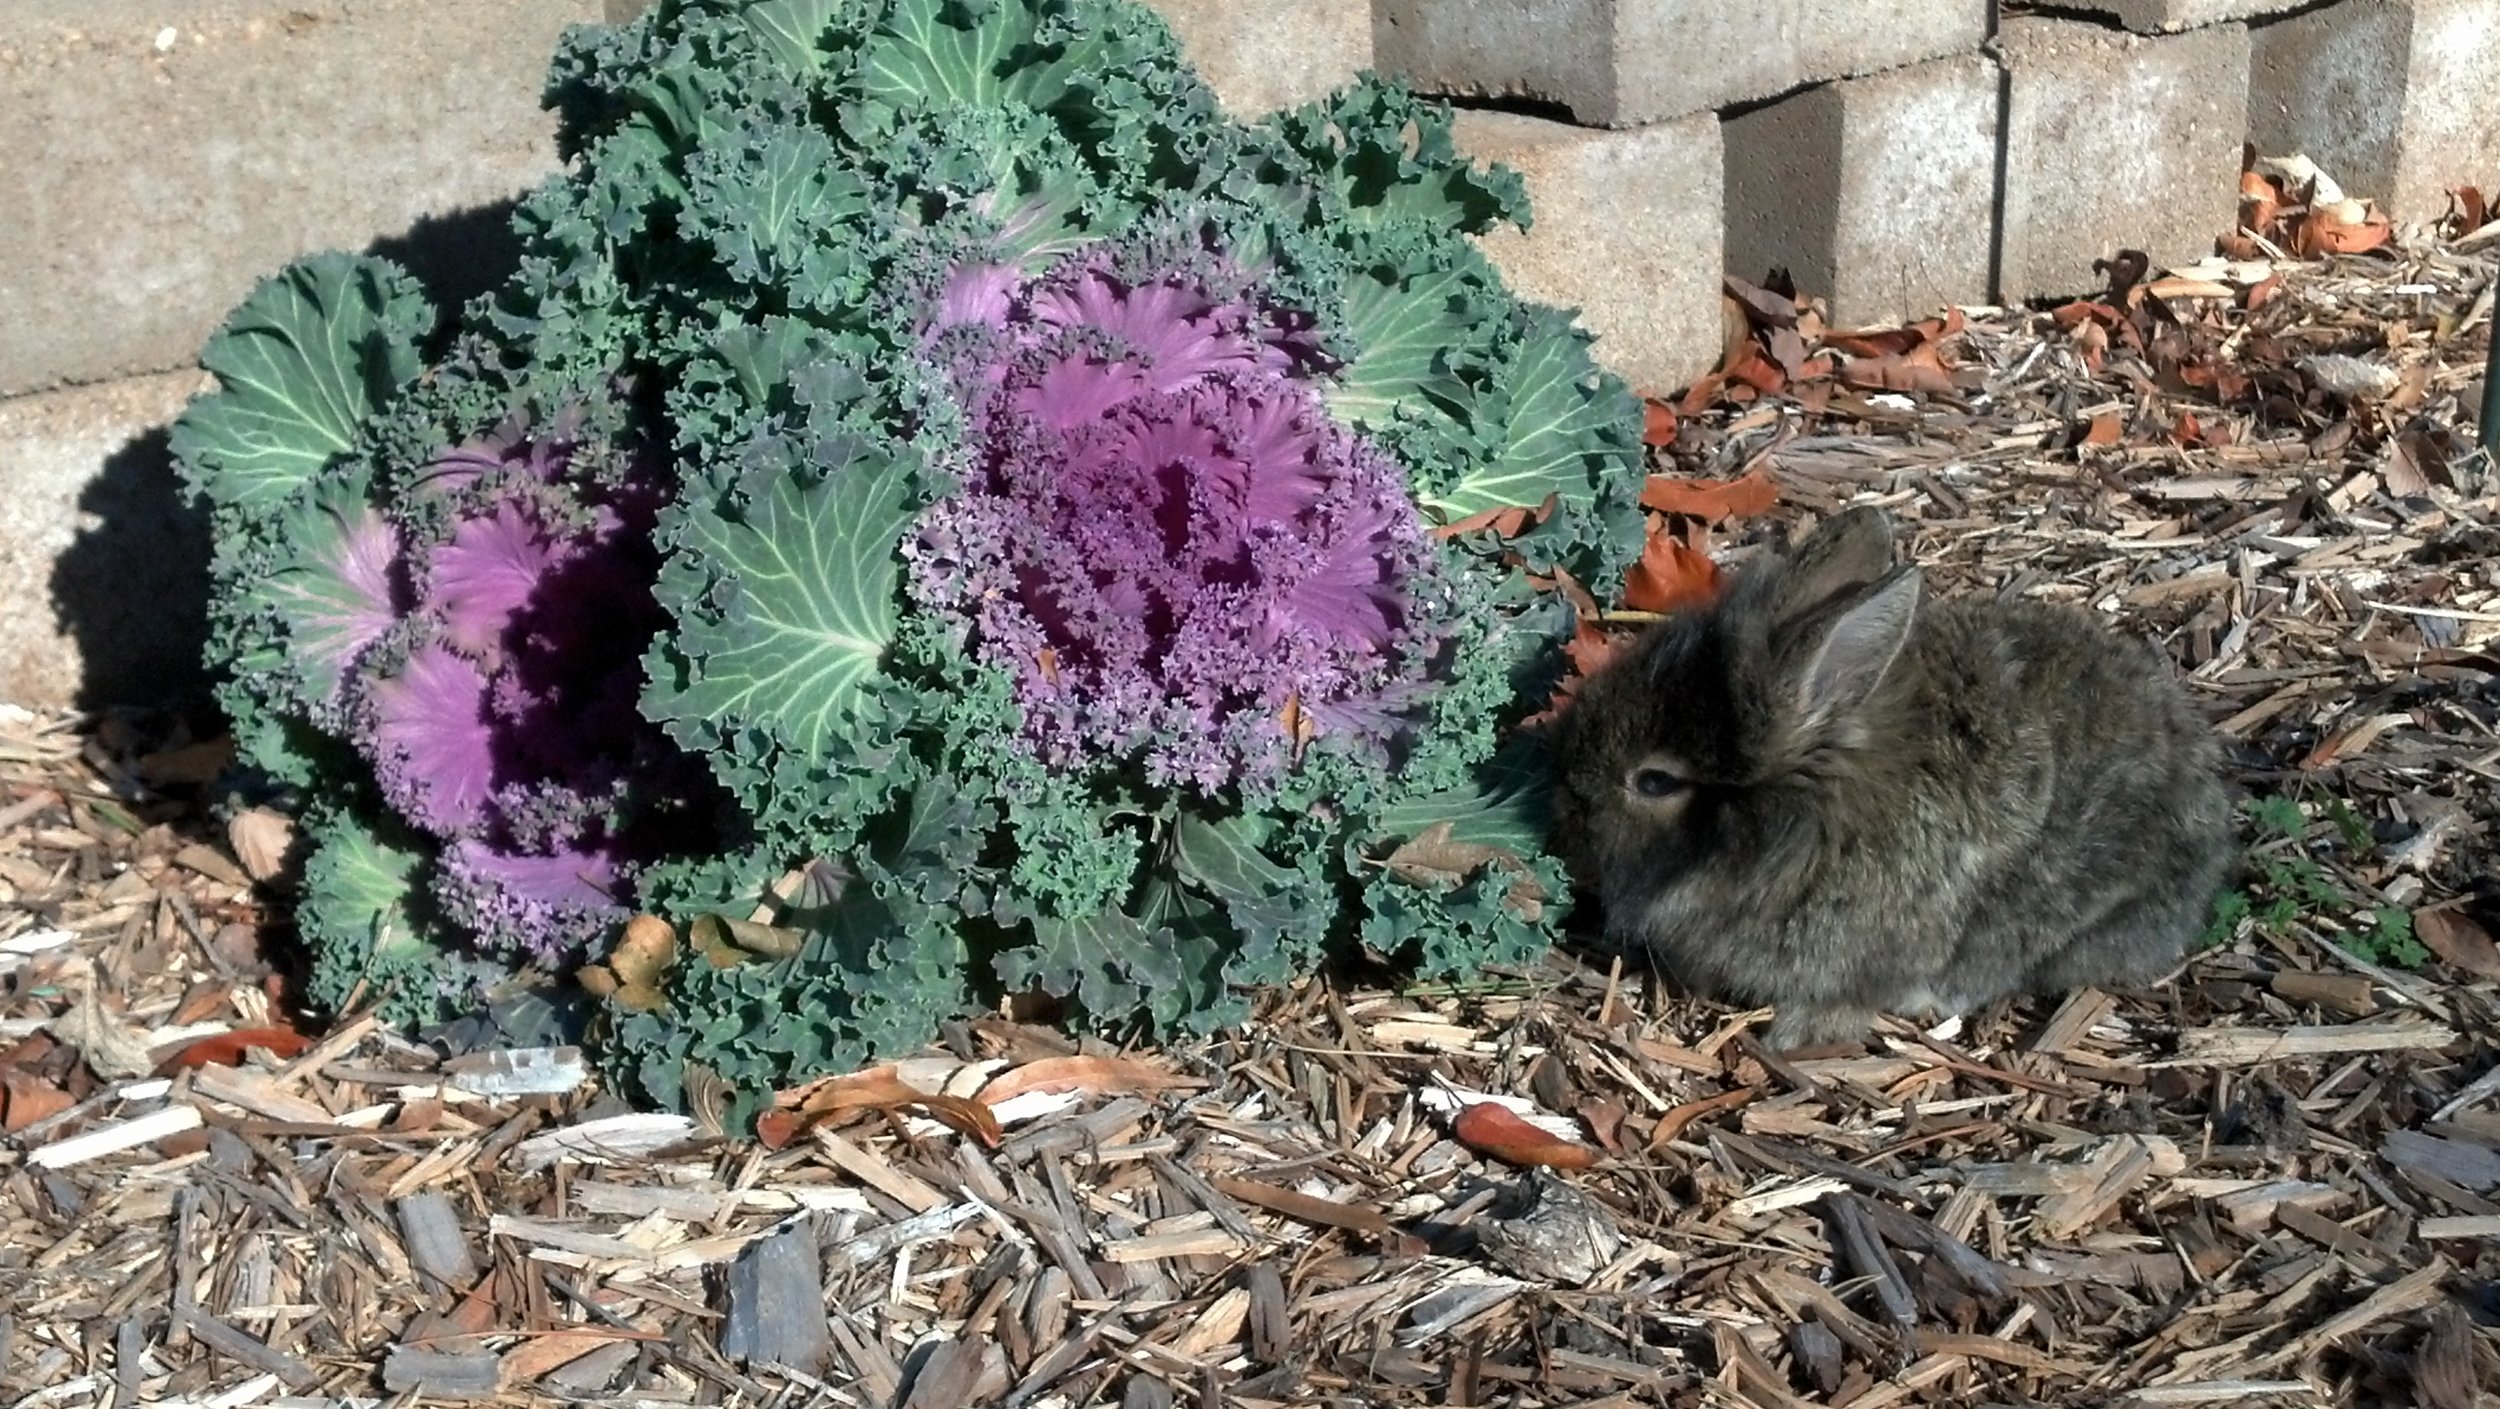 Bunny Gets Started on the Kale Plant Growing in the Garden